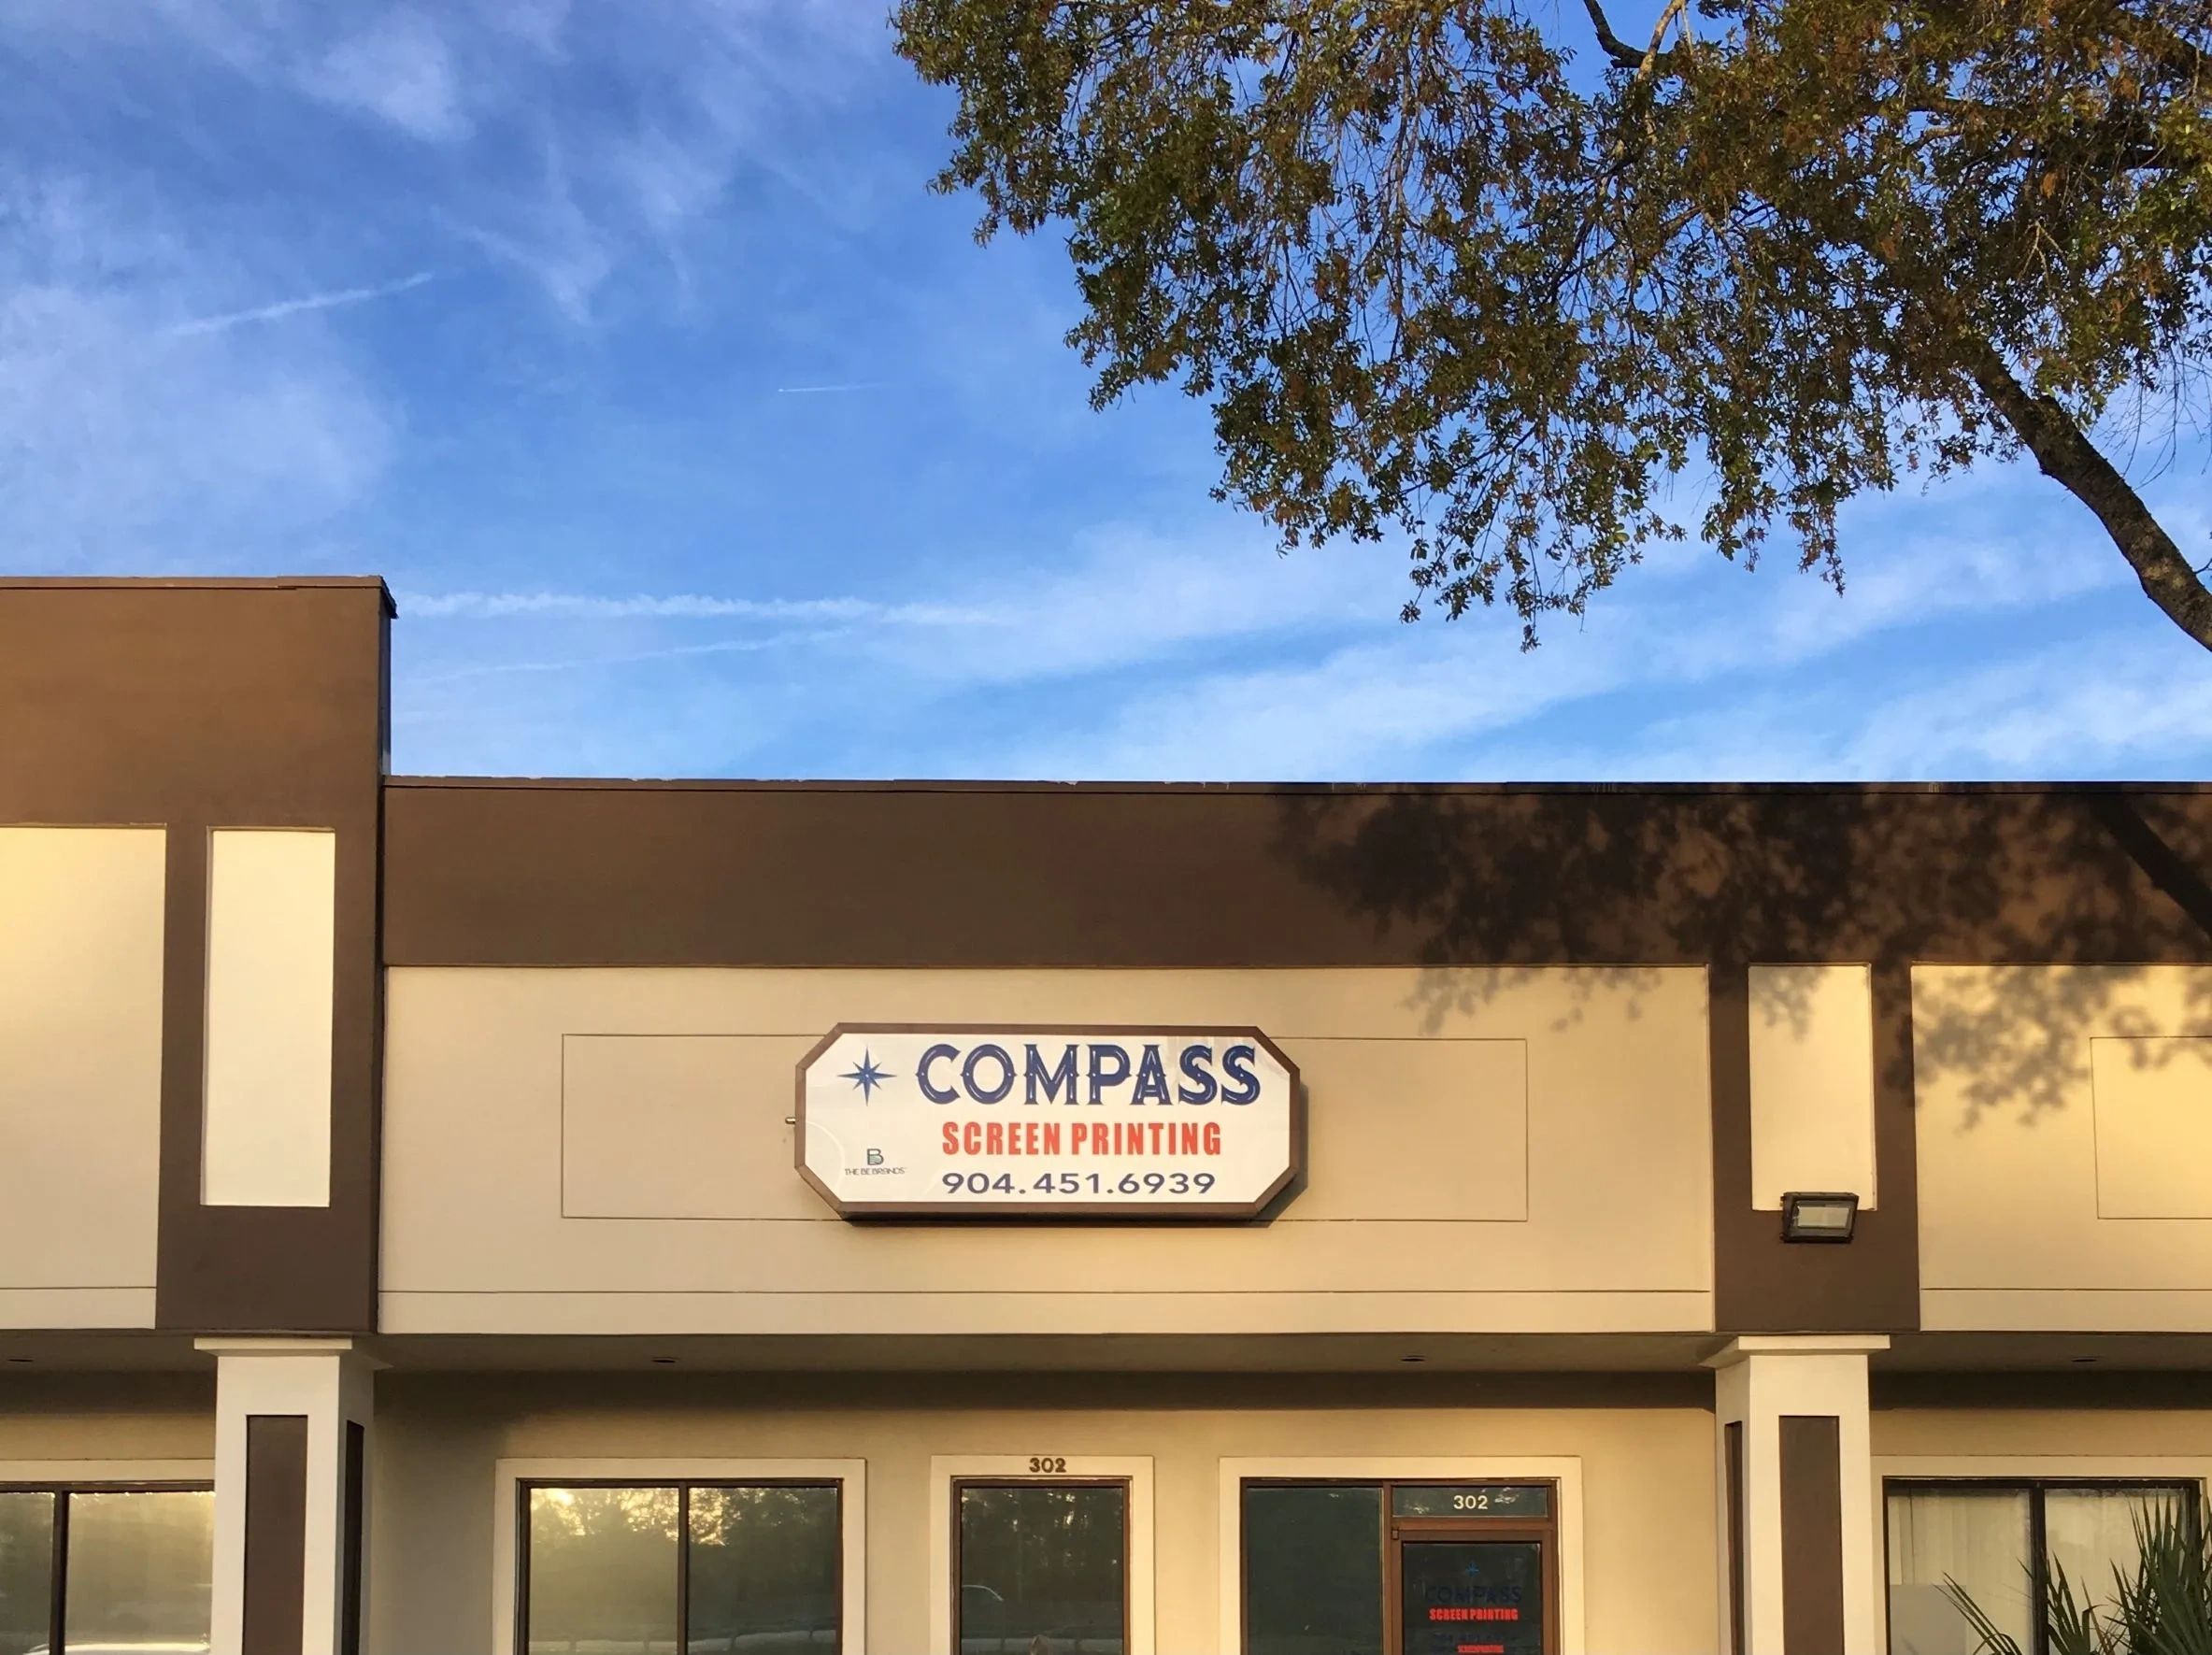 Compass Screen Printing Front of Building
facing I-95N at Bowden Road exit 